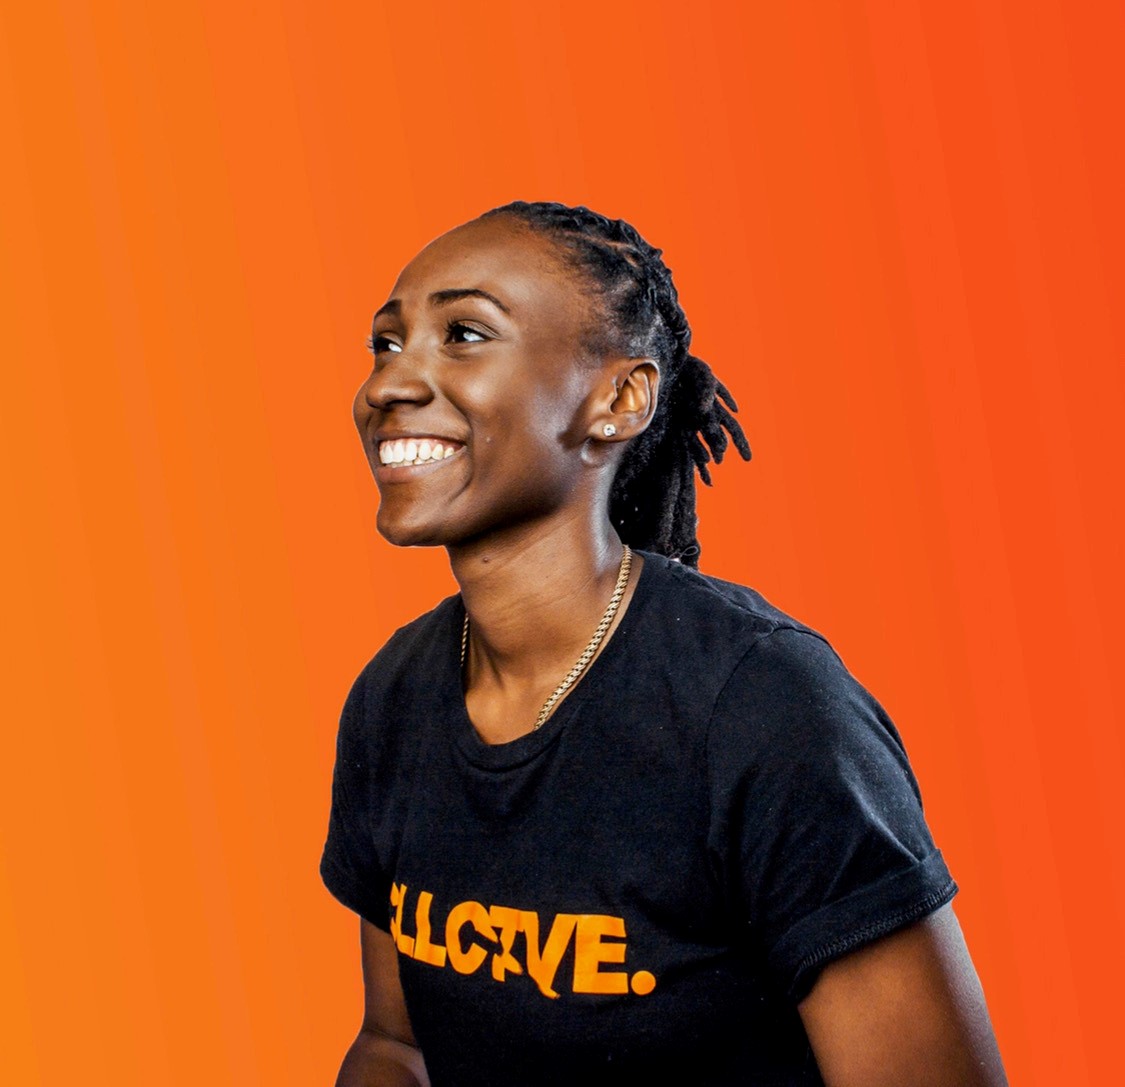 person against an orange background